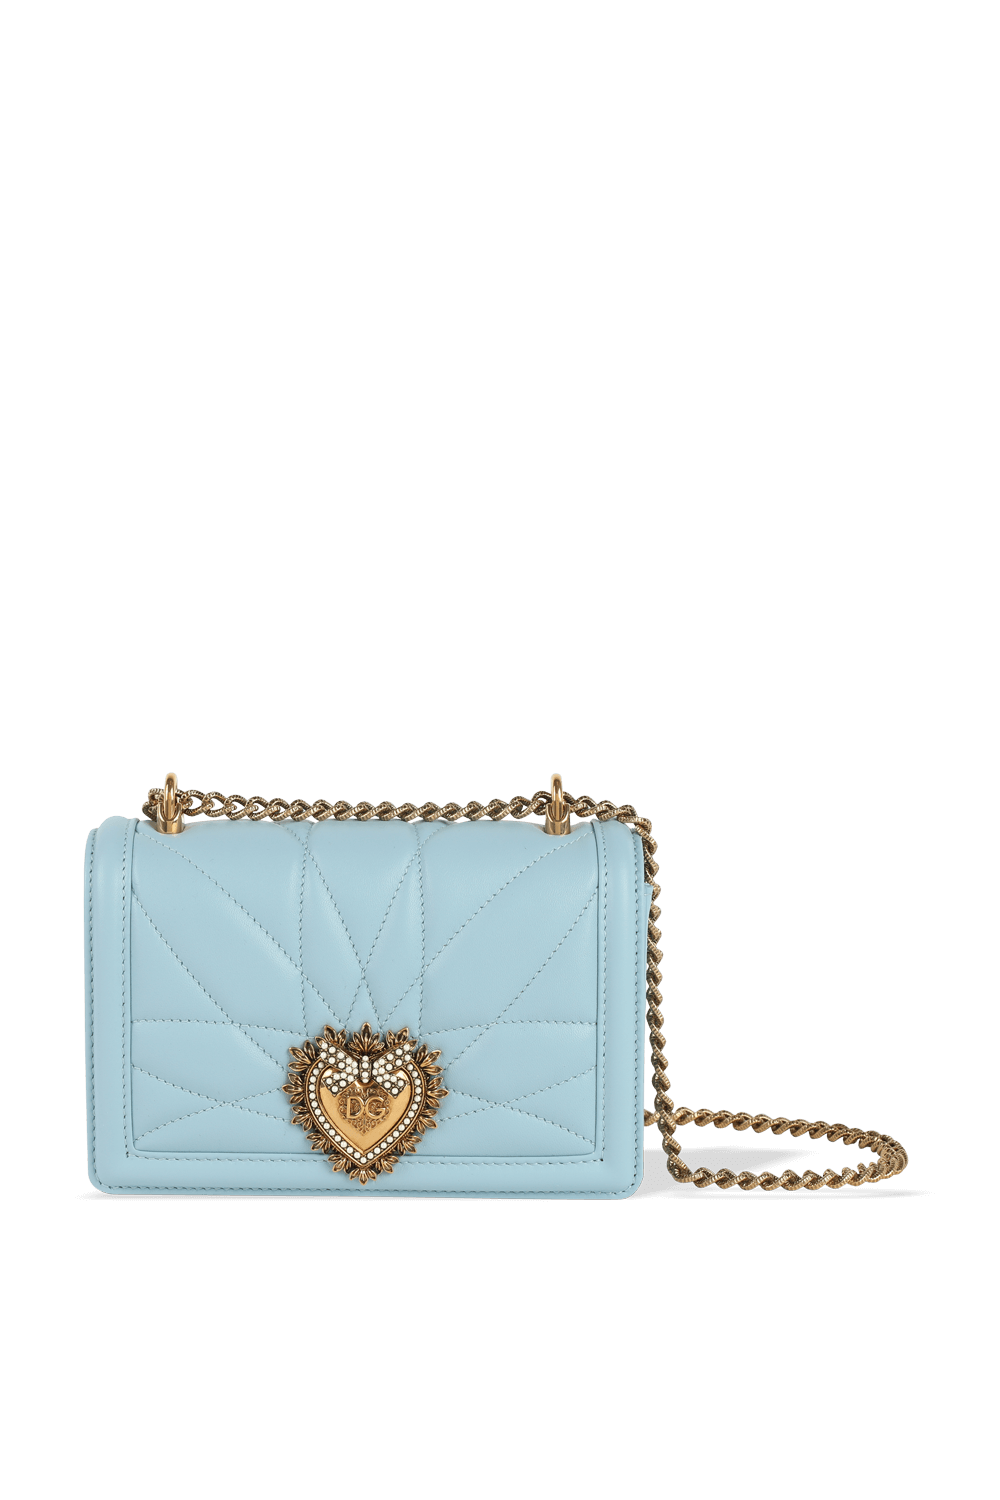 Small Devotion Crossbody Bag in Azure Quilted Nappa Leather DOLCE & GABBANA